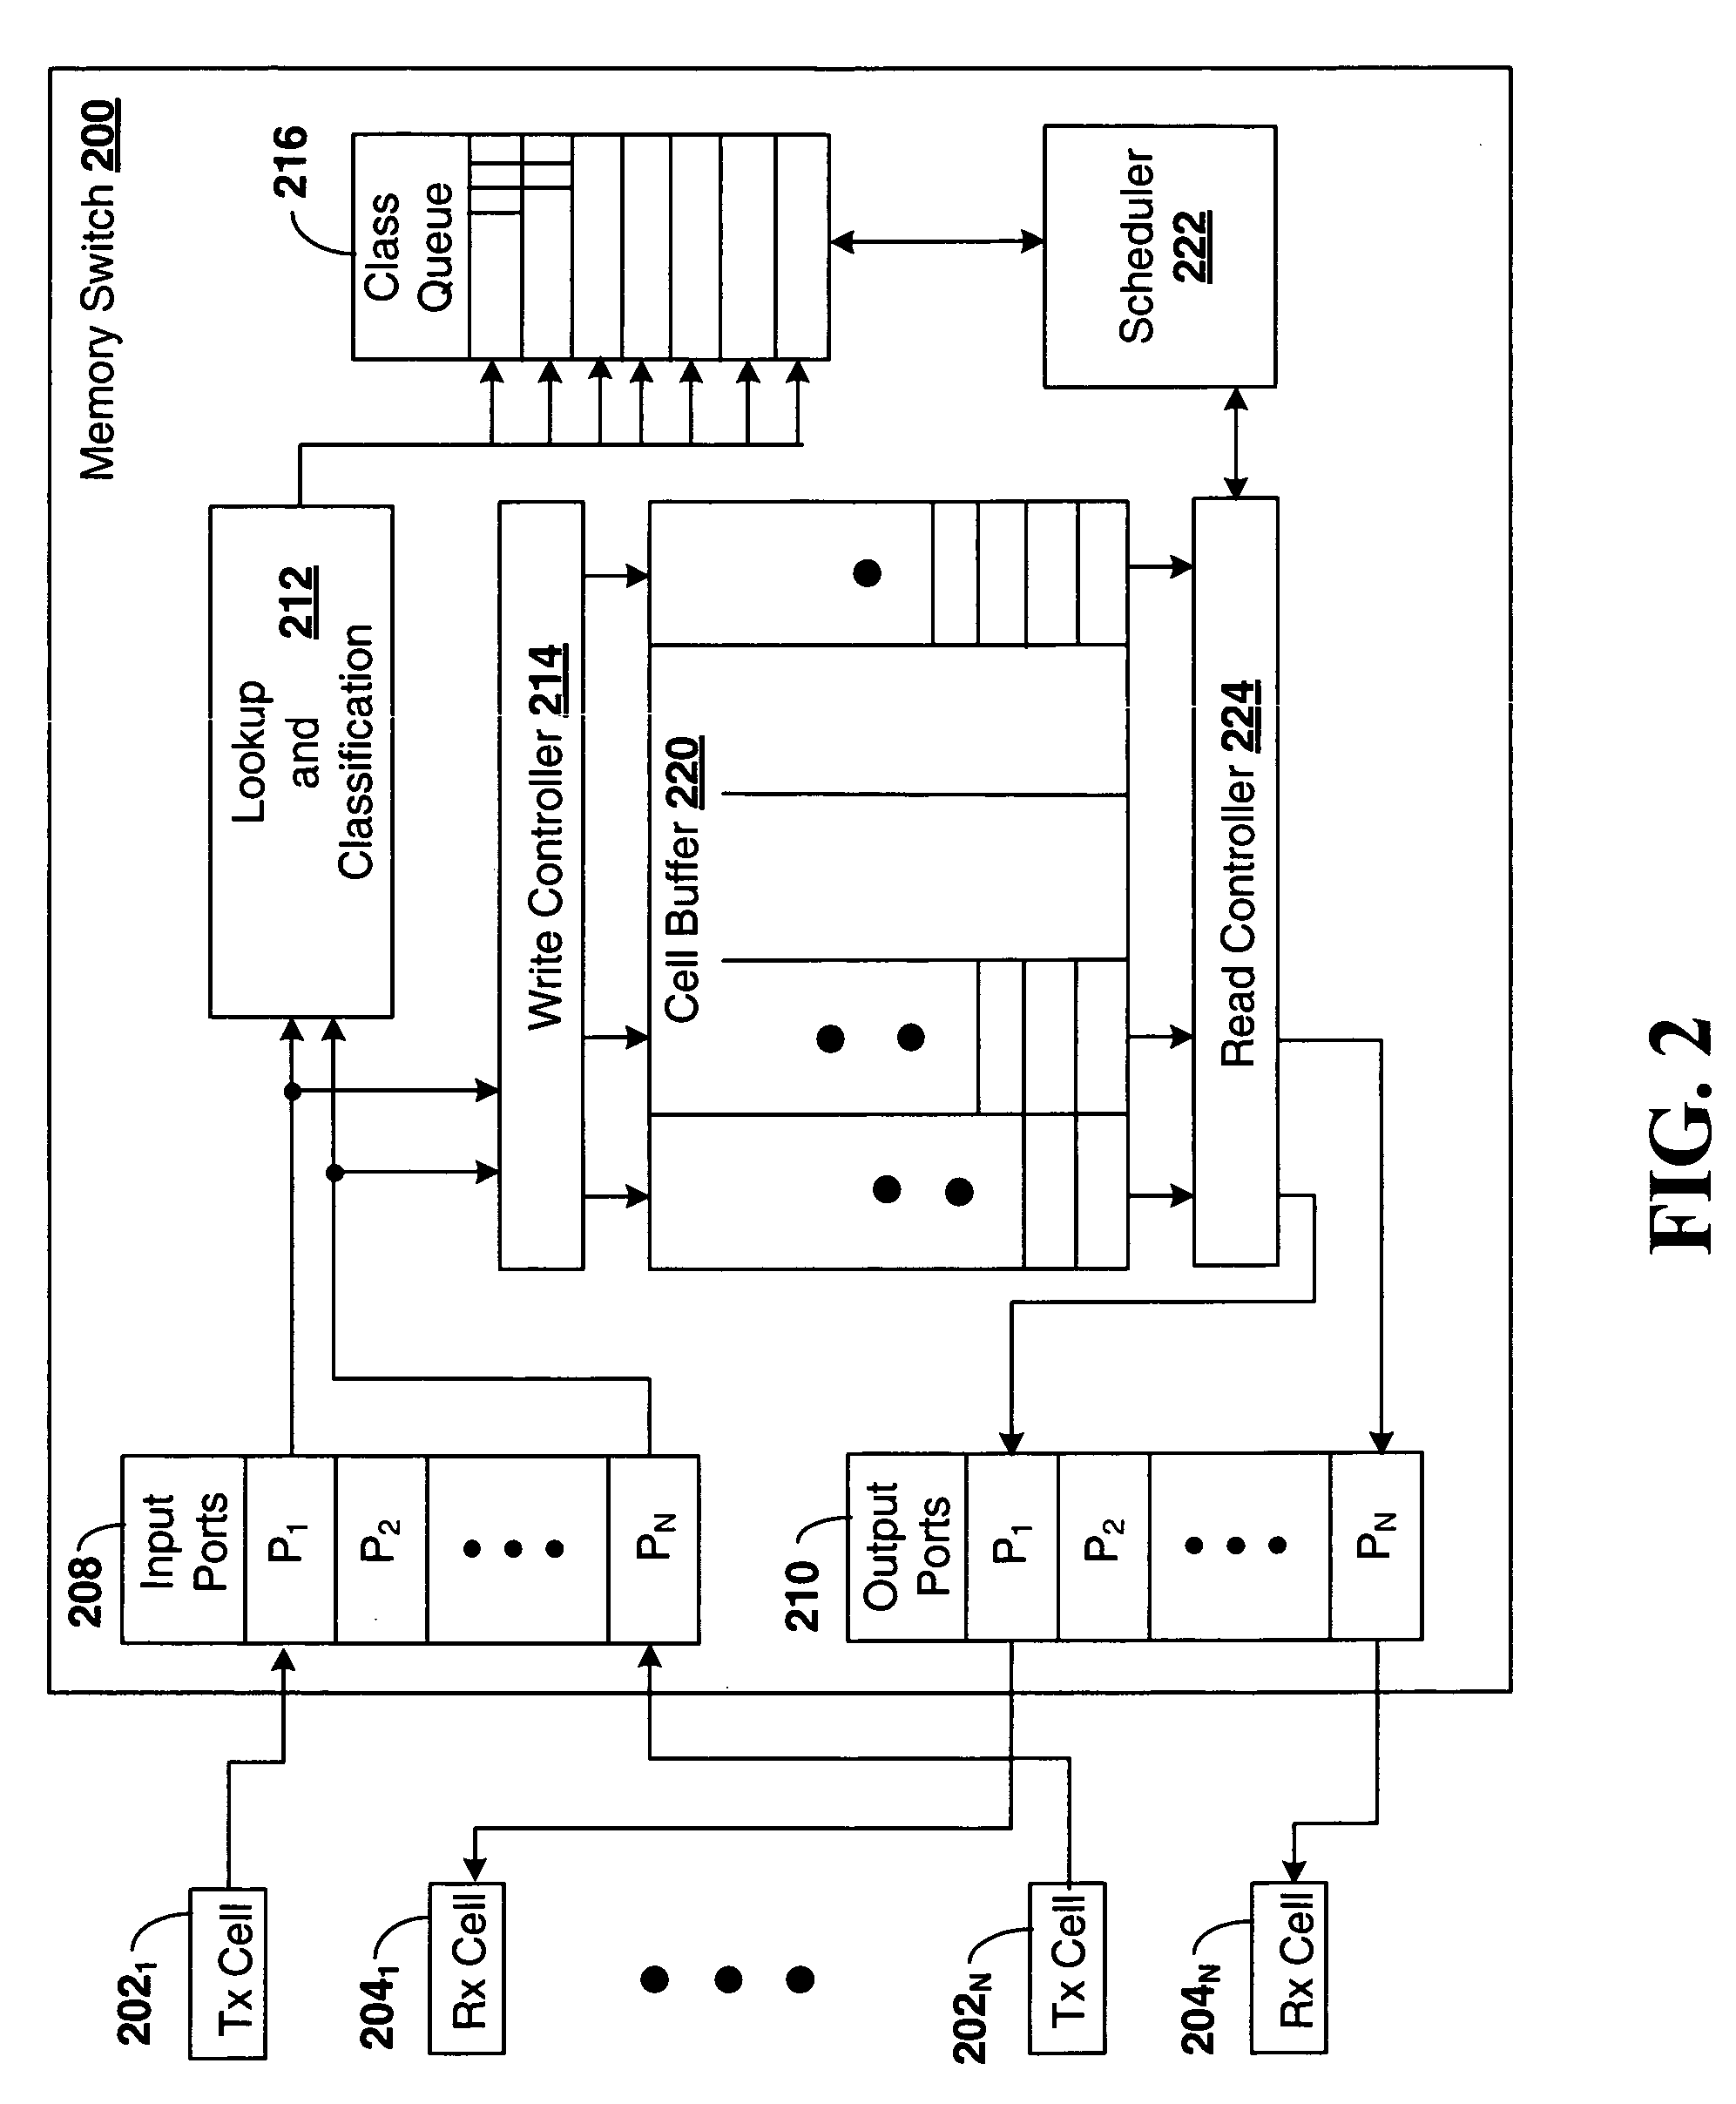 Scalable shared network memory switch for an FPGA